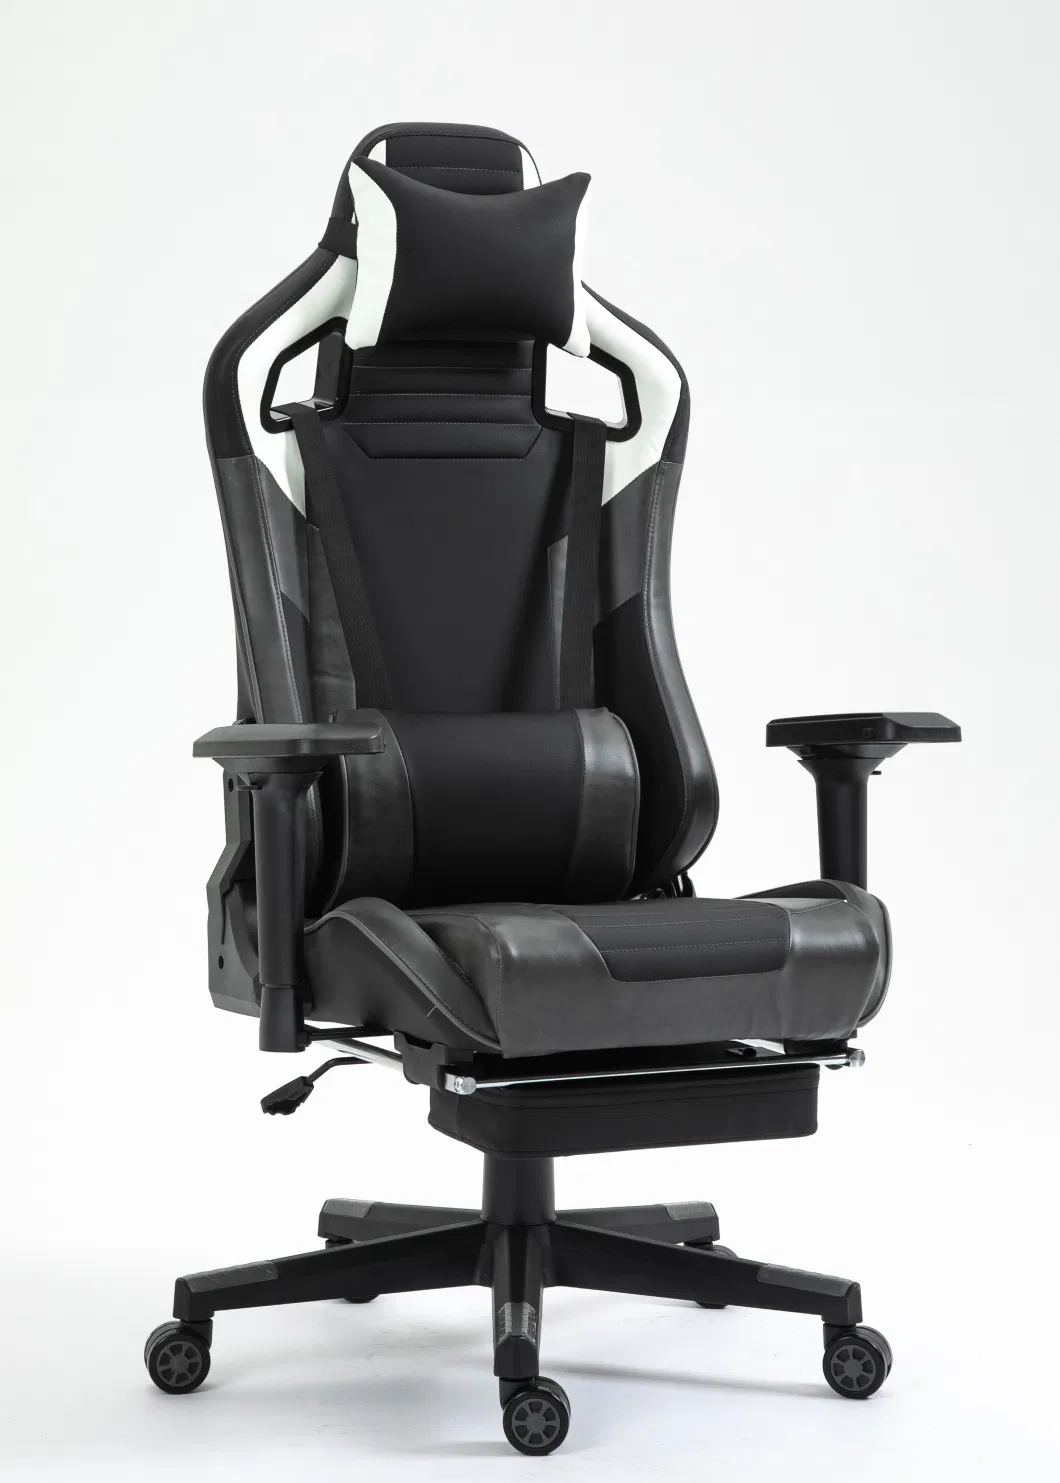 Modern Design High PU Quality Sparkle Luminous Large Office Gaming Chair 180 Degree Reclining